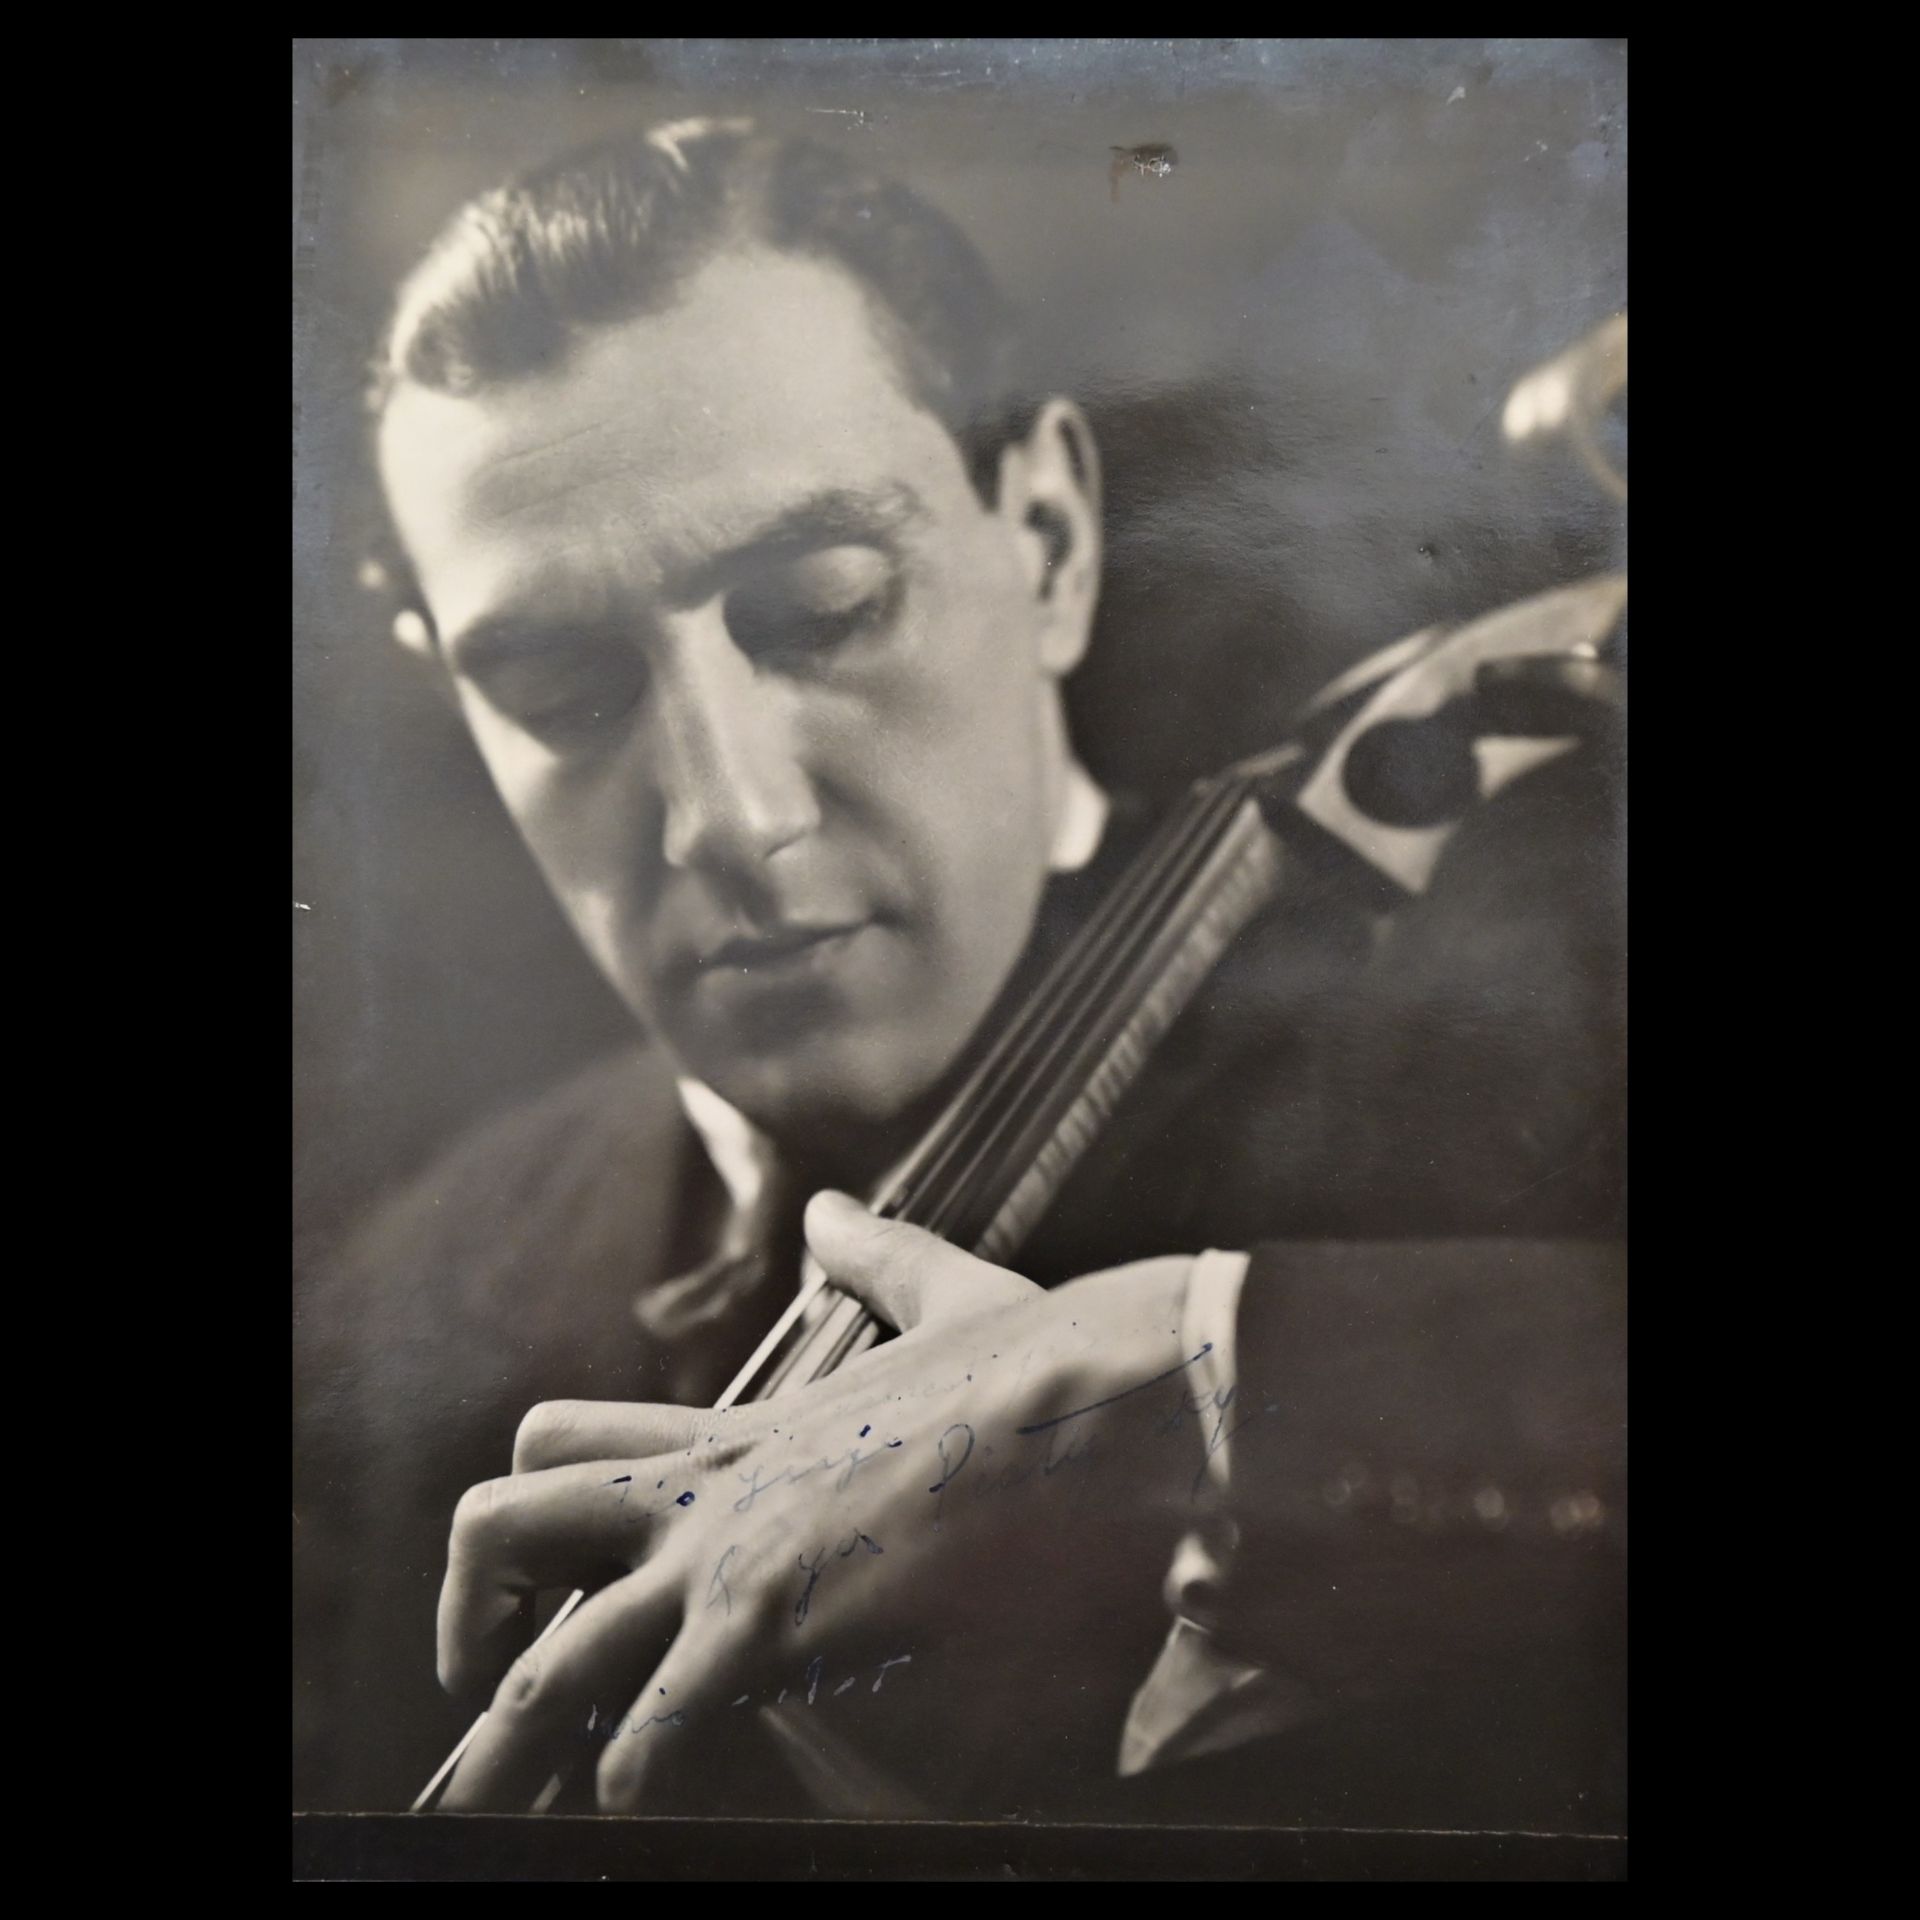 Photo of the famous cellist Gregor Piatigorsky with an autograph, Paris, 1934. - Image 2 of 5